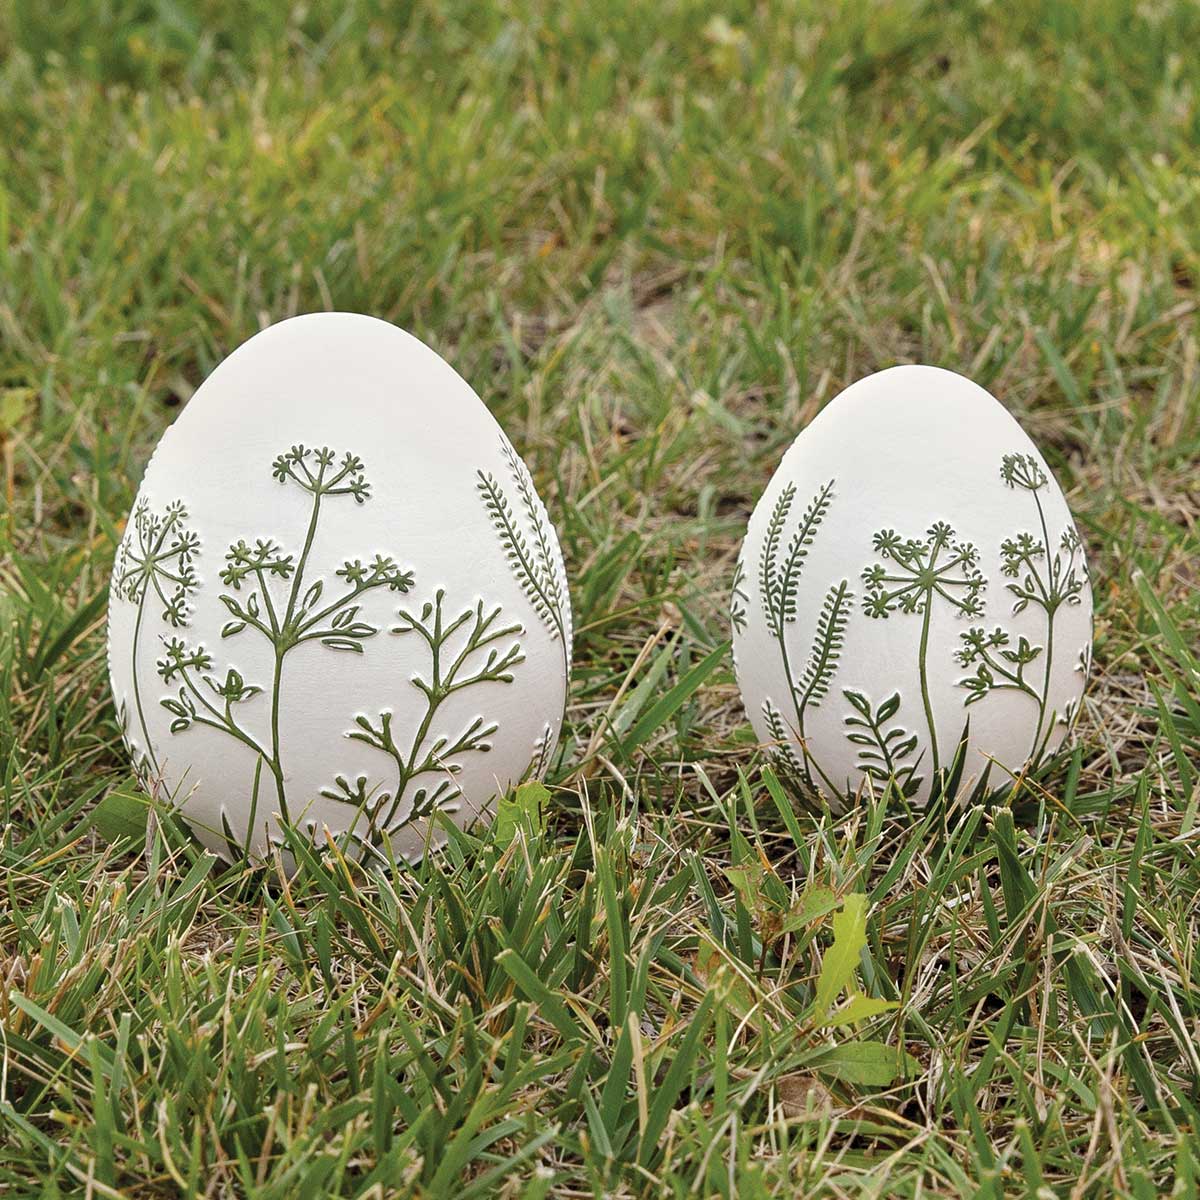 EGG FLOWER MOTIF LARGE 4.75IN X 5.75IN WHITE/GREEN CONCRETE